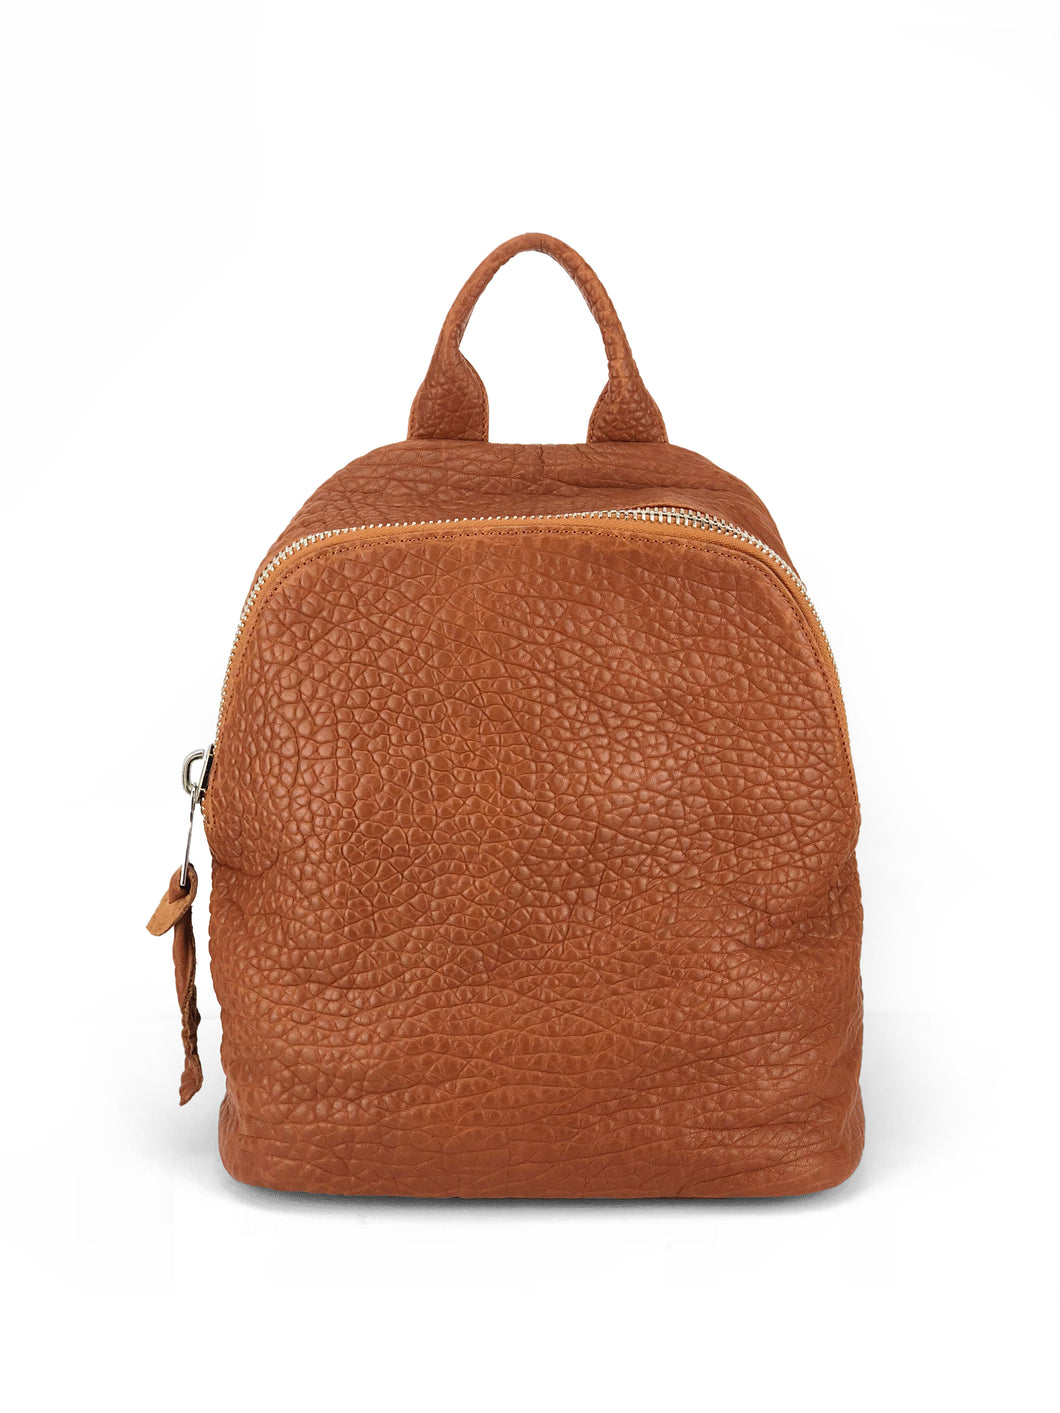 Pebbled Leather Backpack - Tan